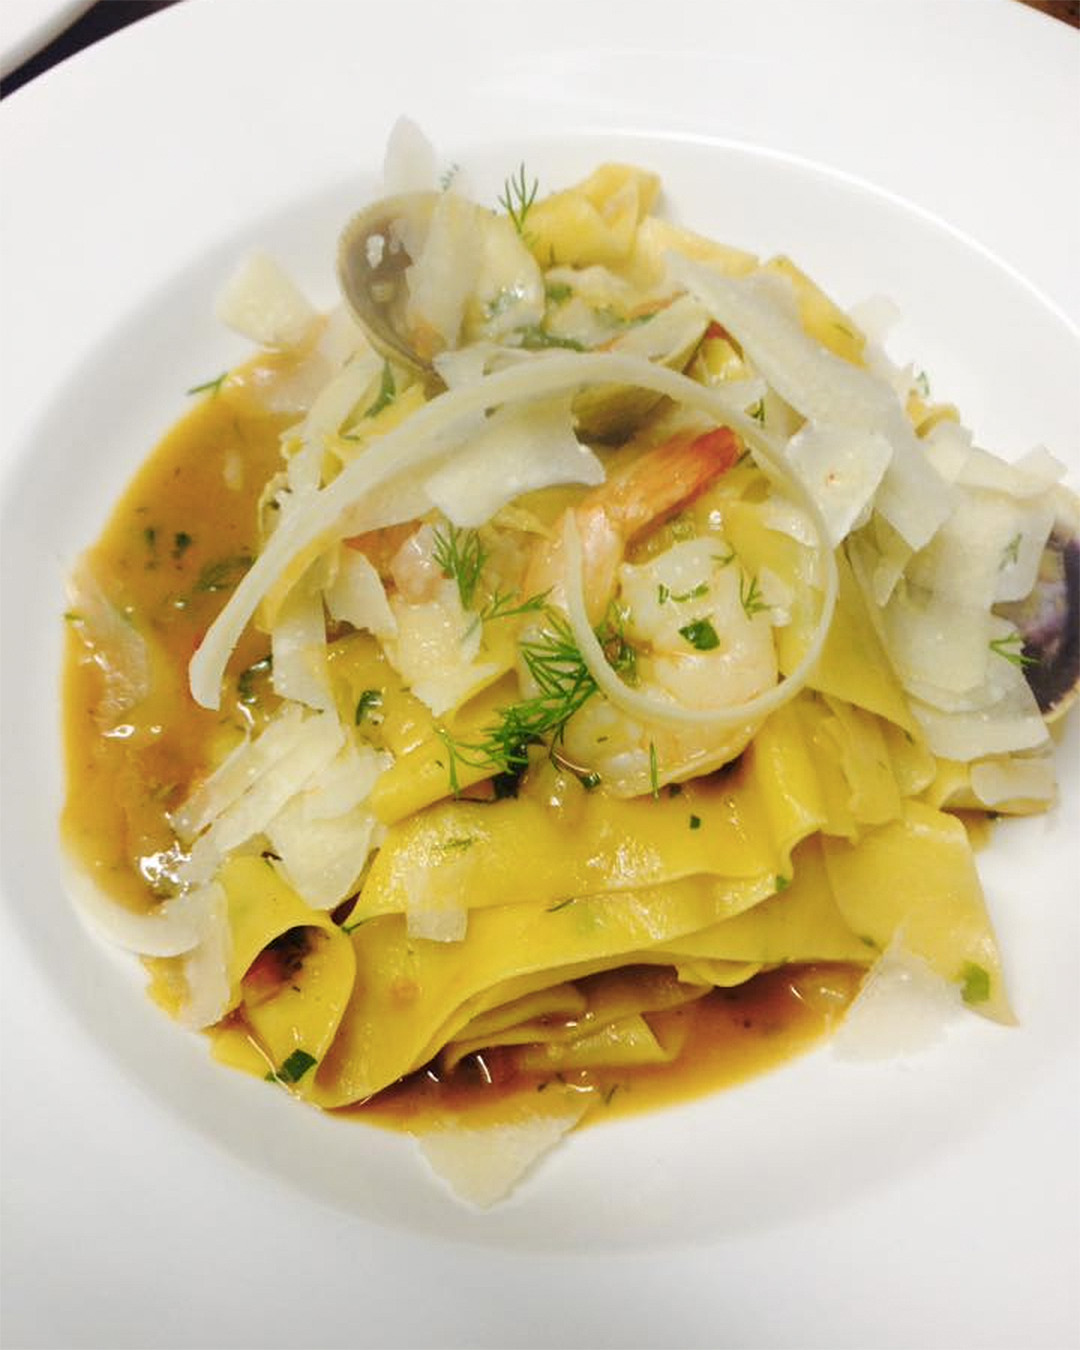 Clam and prawn pappardelle, crayfish sauce and shaved parmesan at DeVille cafe.